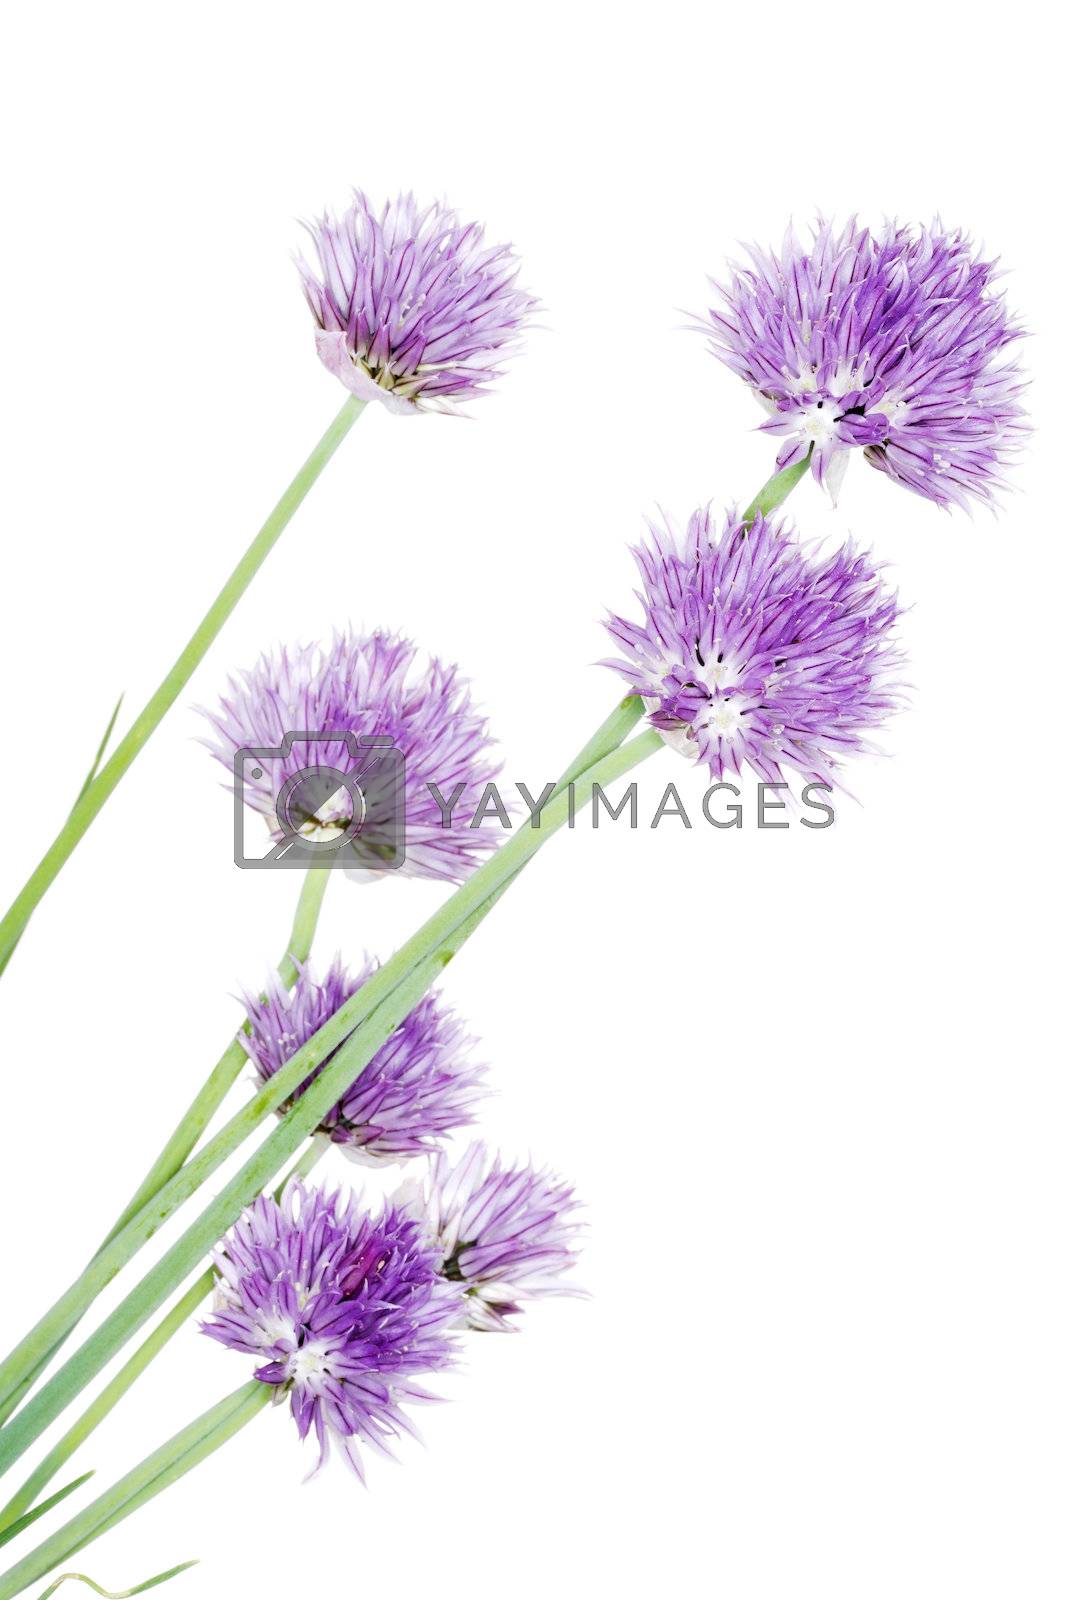 Royalty free image of Chives decorative flowers  by BDS